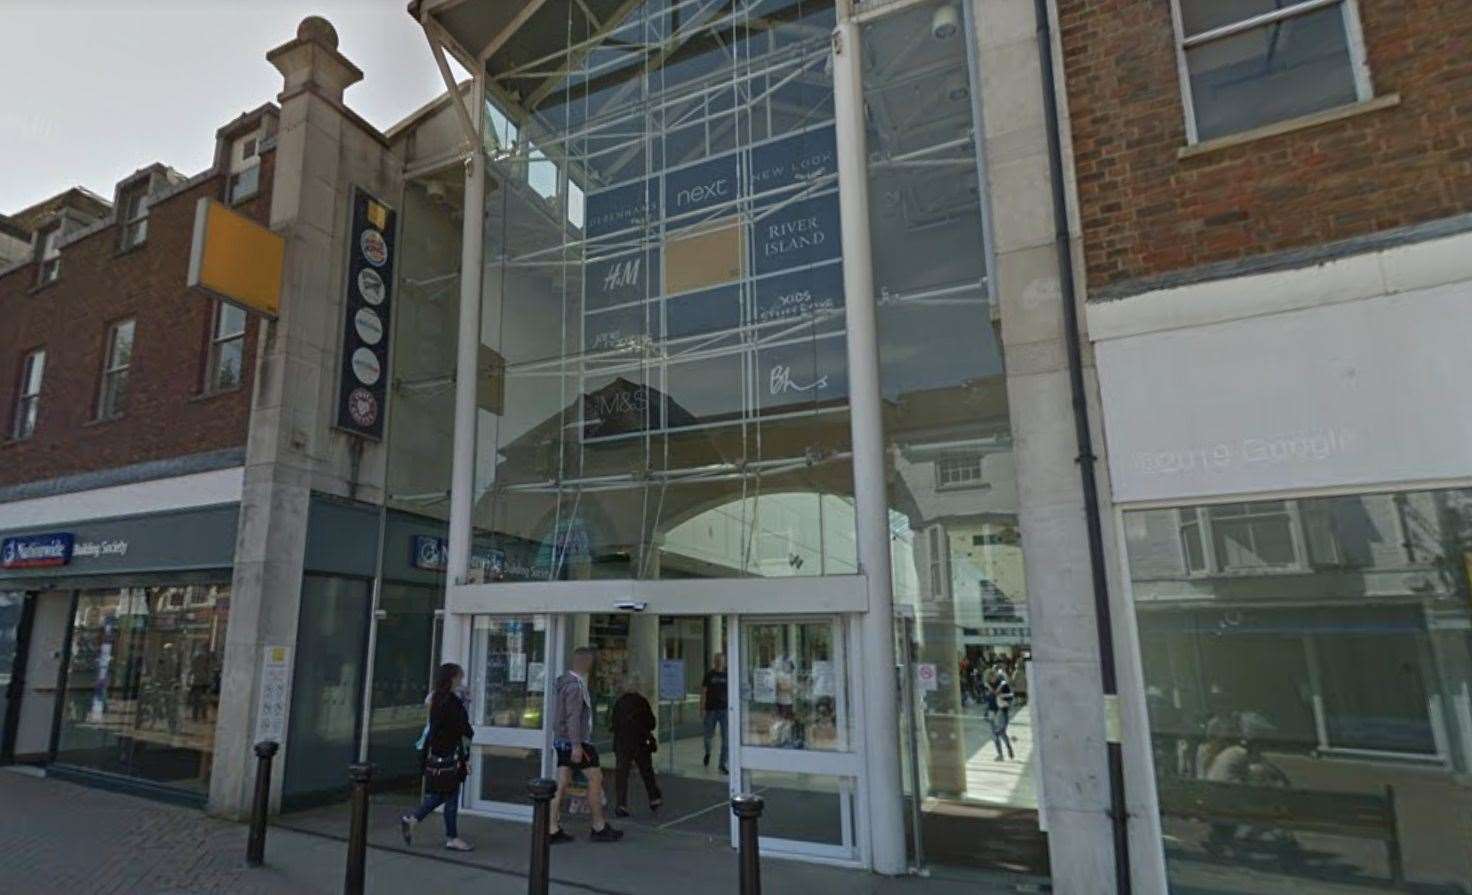 The boy has been banned from County Square Shopping Centre in Ashford town centre. Picture: Google